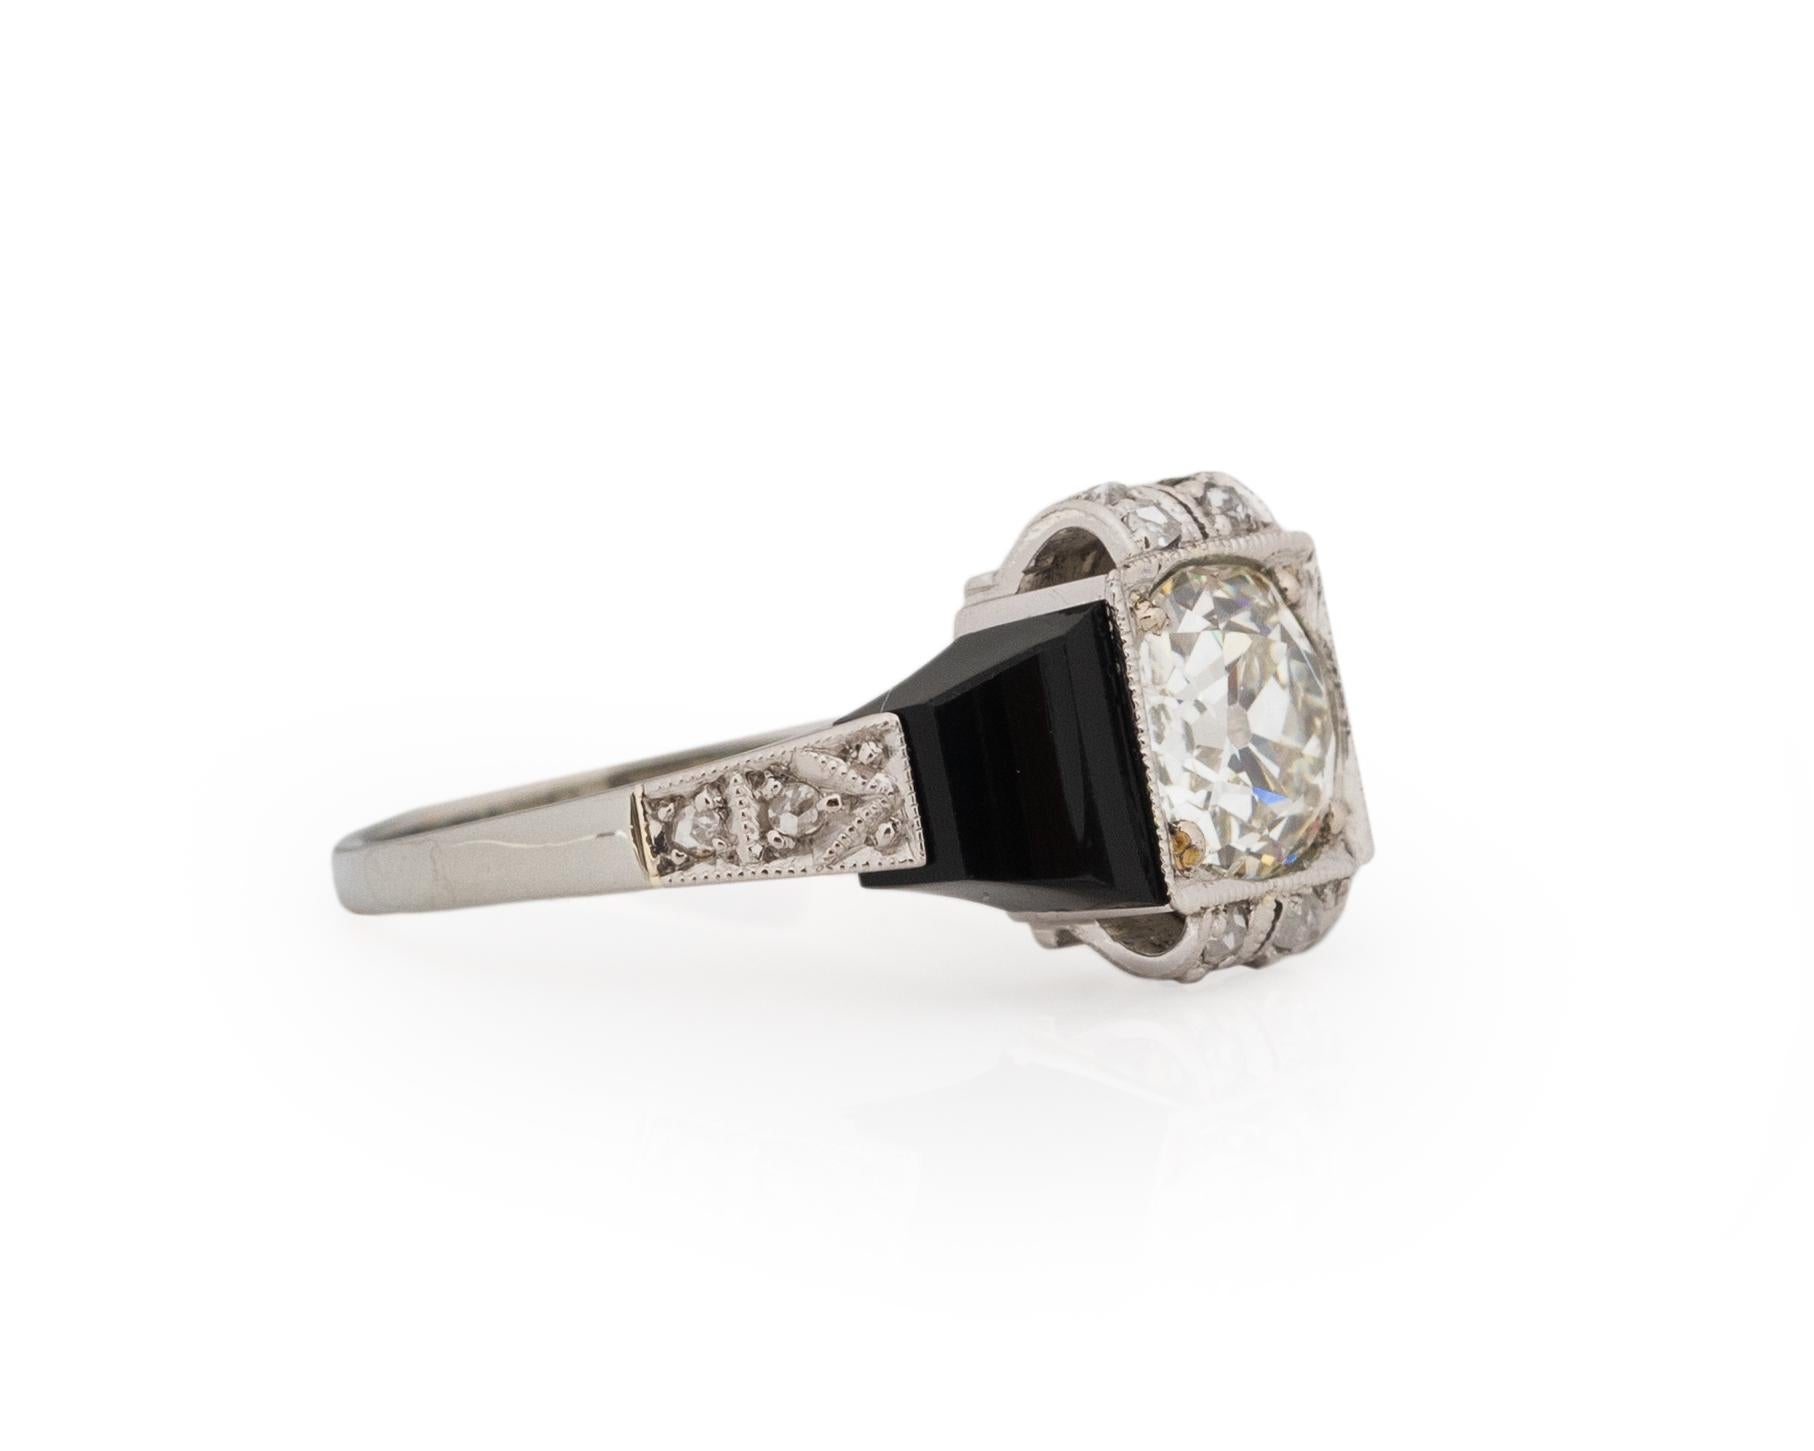 Ring Size: 5.75
Metal Type: 14k White Gold [Hallmarked, and Tested]
Weight: 3.0 grams

Center Diamond Details:
GIA REPORT #: 2223272093
Weight: 1.18ct
Cut: Old European brilliant
Color: J
Clarity: SI1
Measurements: 6.55mm x 6.53mm x 3.98mm

Side